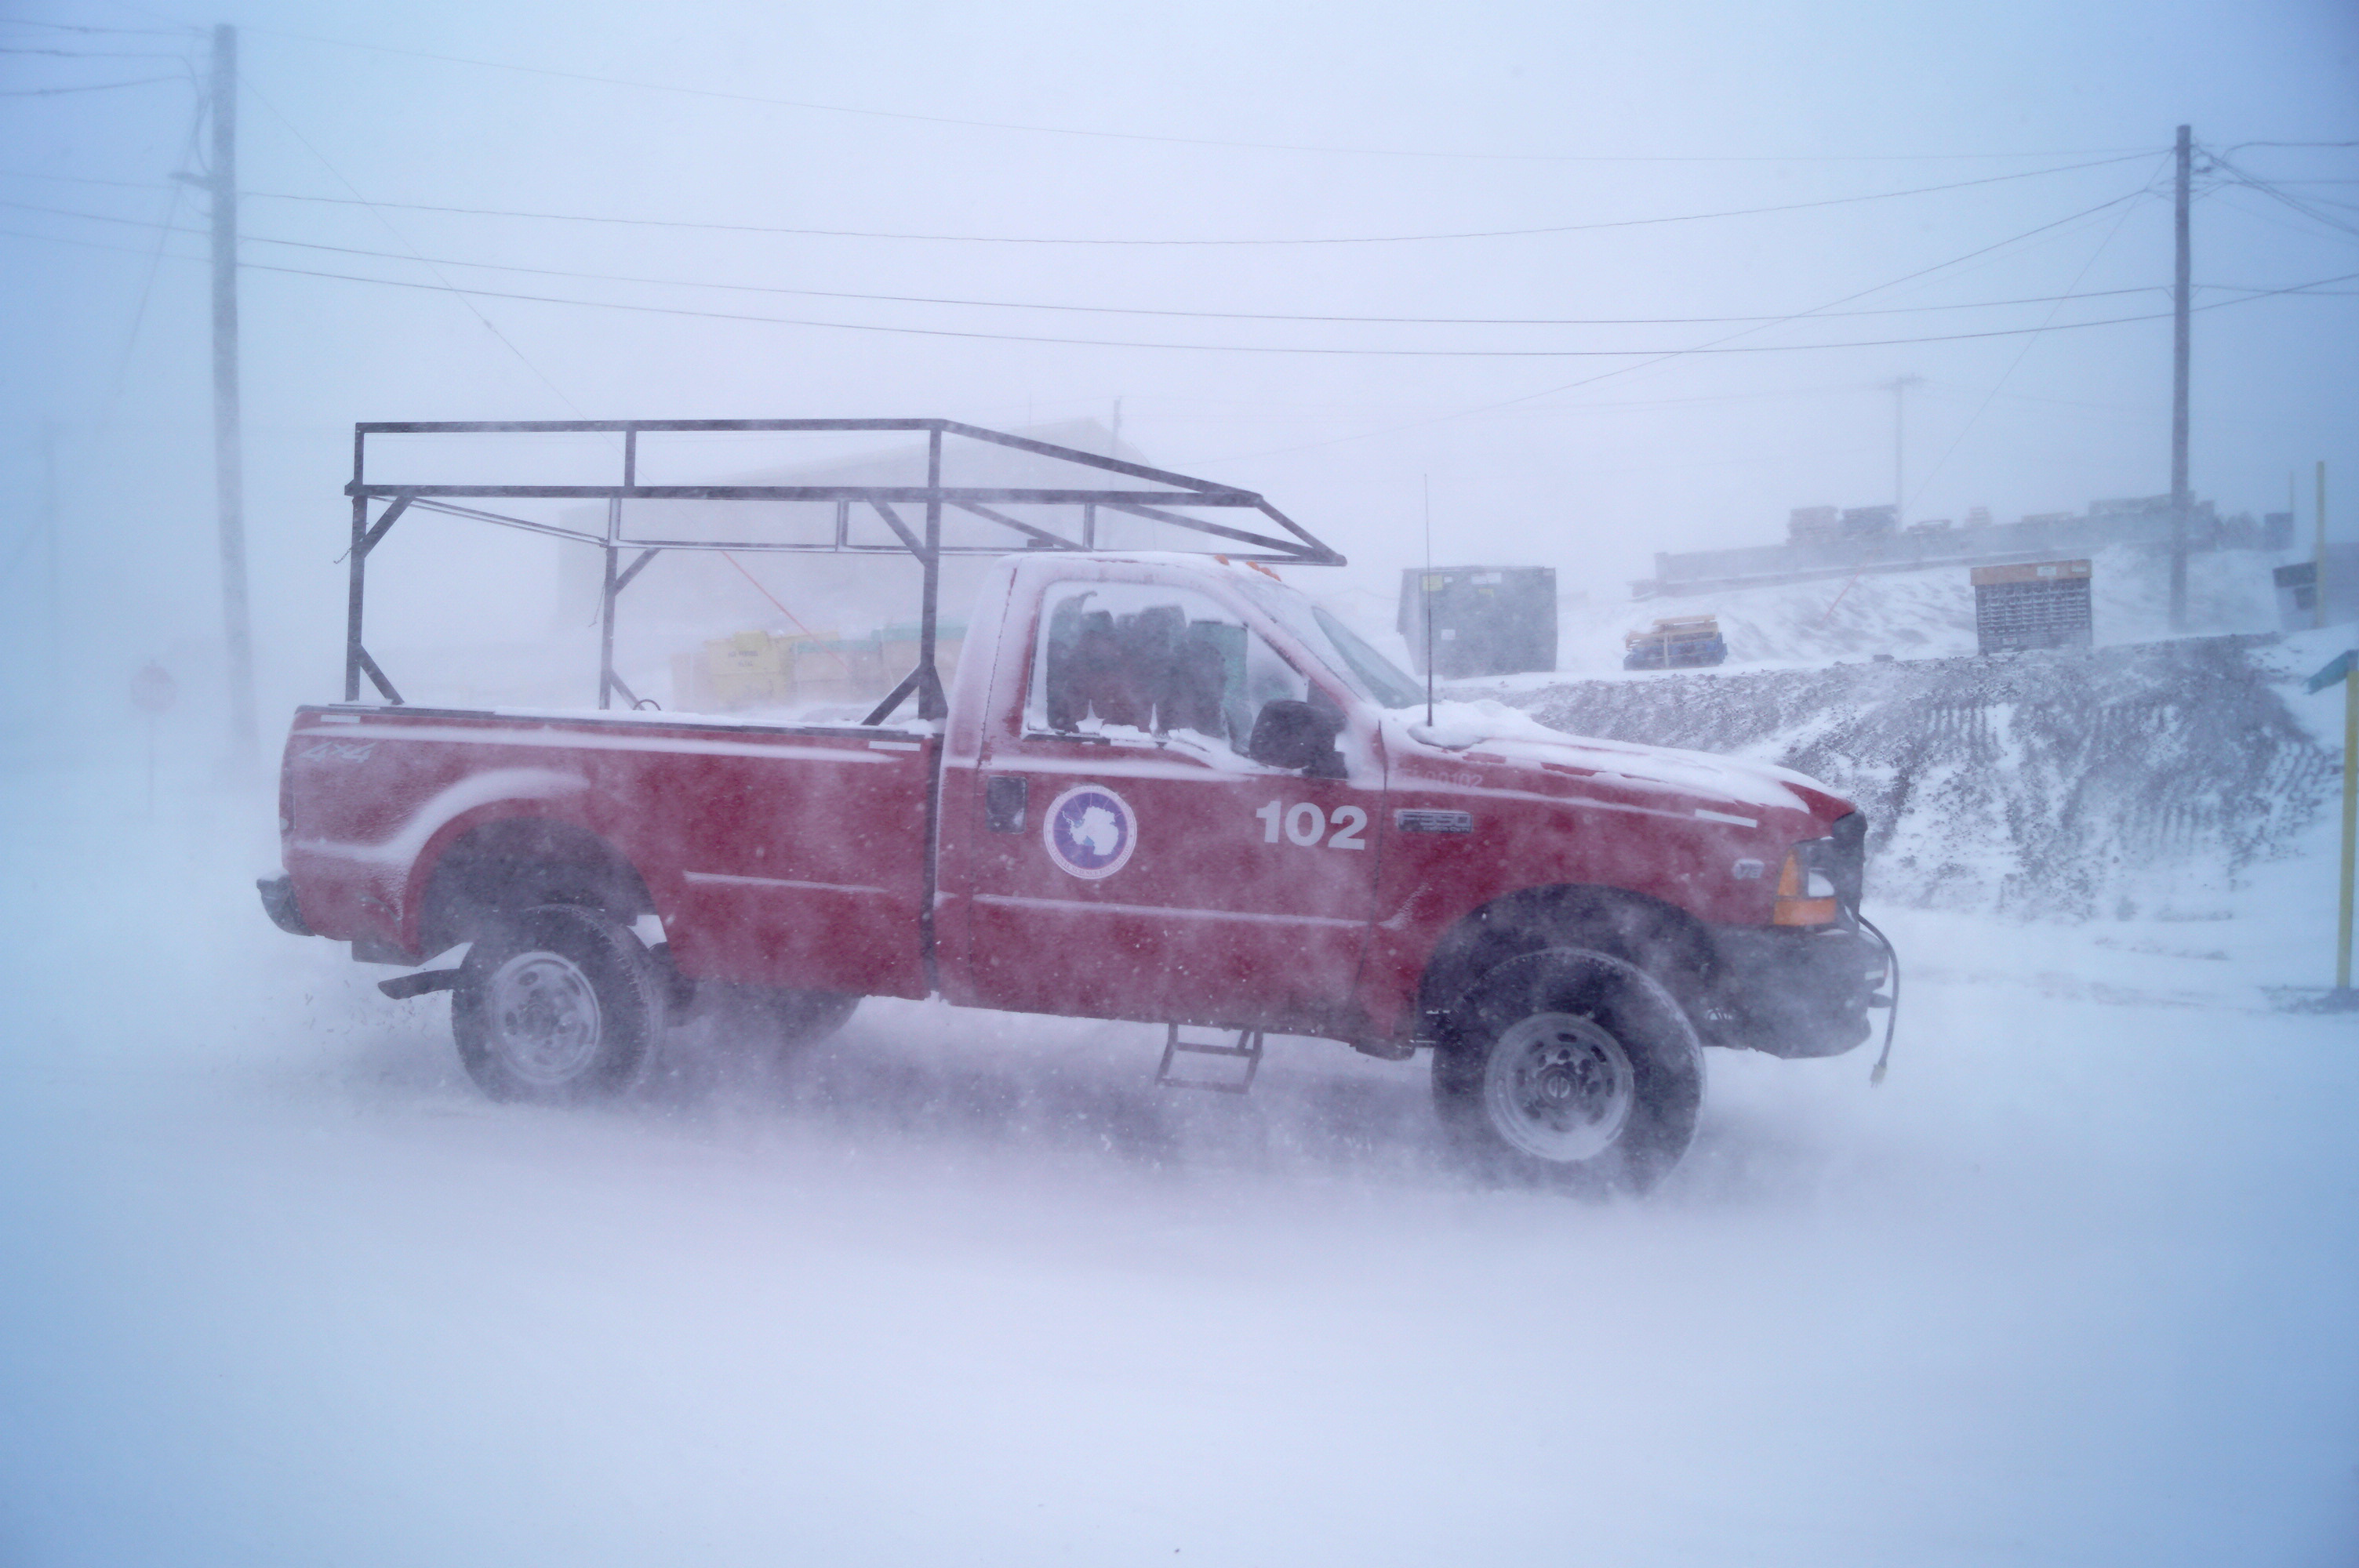 A red pickup truck in snowy weather.